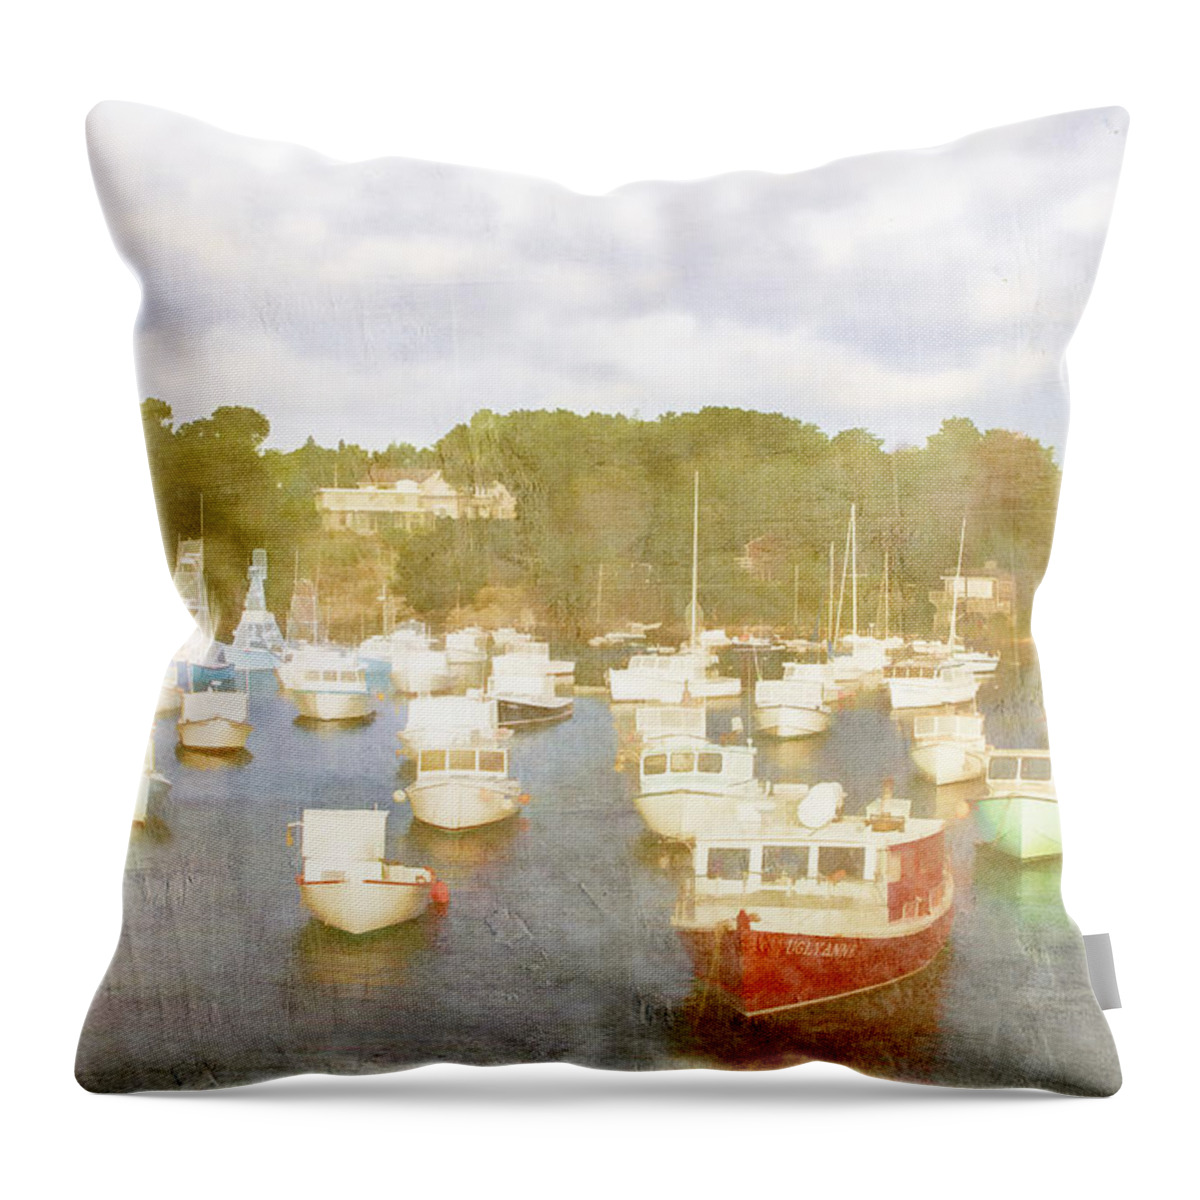 Perkins Cove Throw Pillow featuring the photograph Perkins Cove Lobster Boats Maine by Carol Leigh